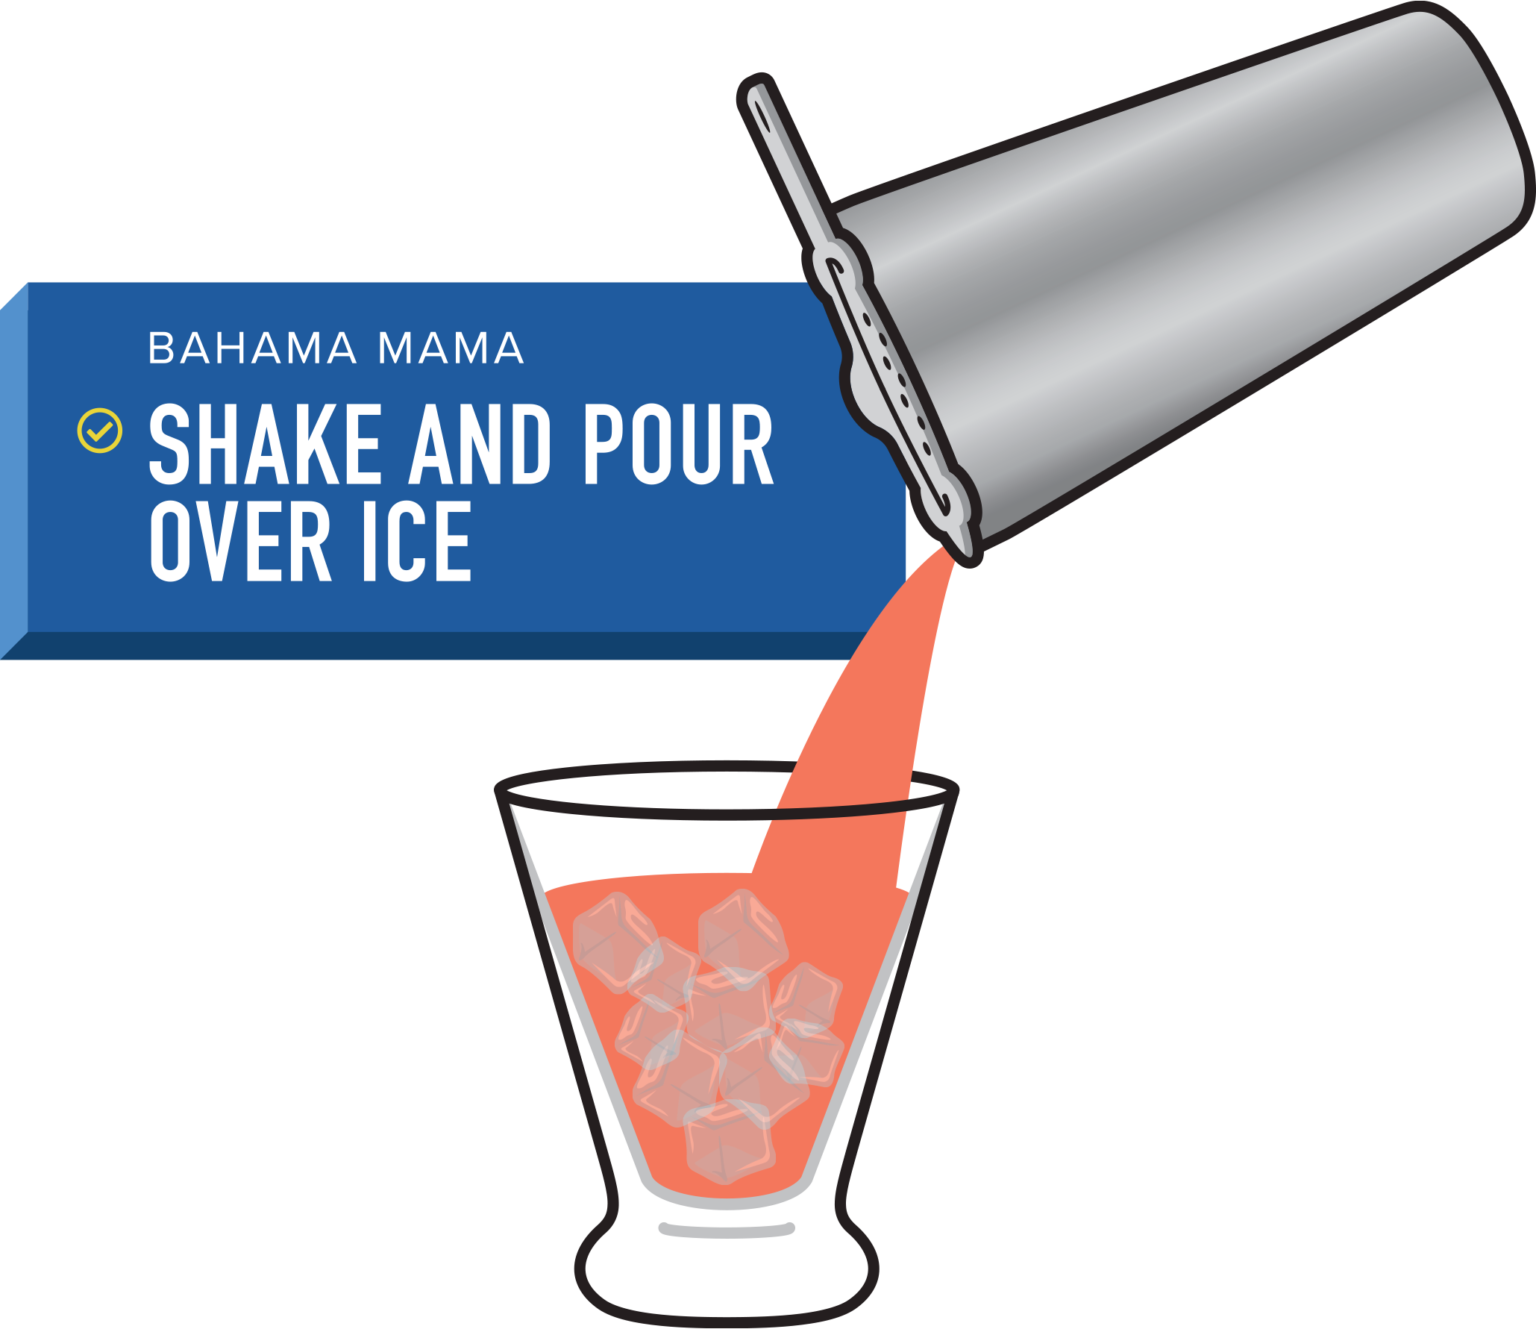 The Royal Caribbean drink simulator offering instructions for making a Bahama Mama: Shake and Pour Over Ice